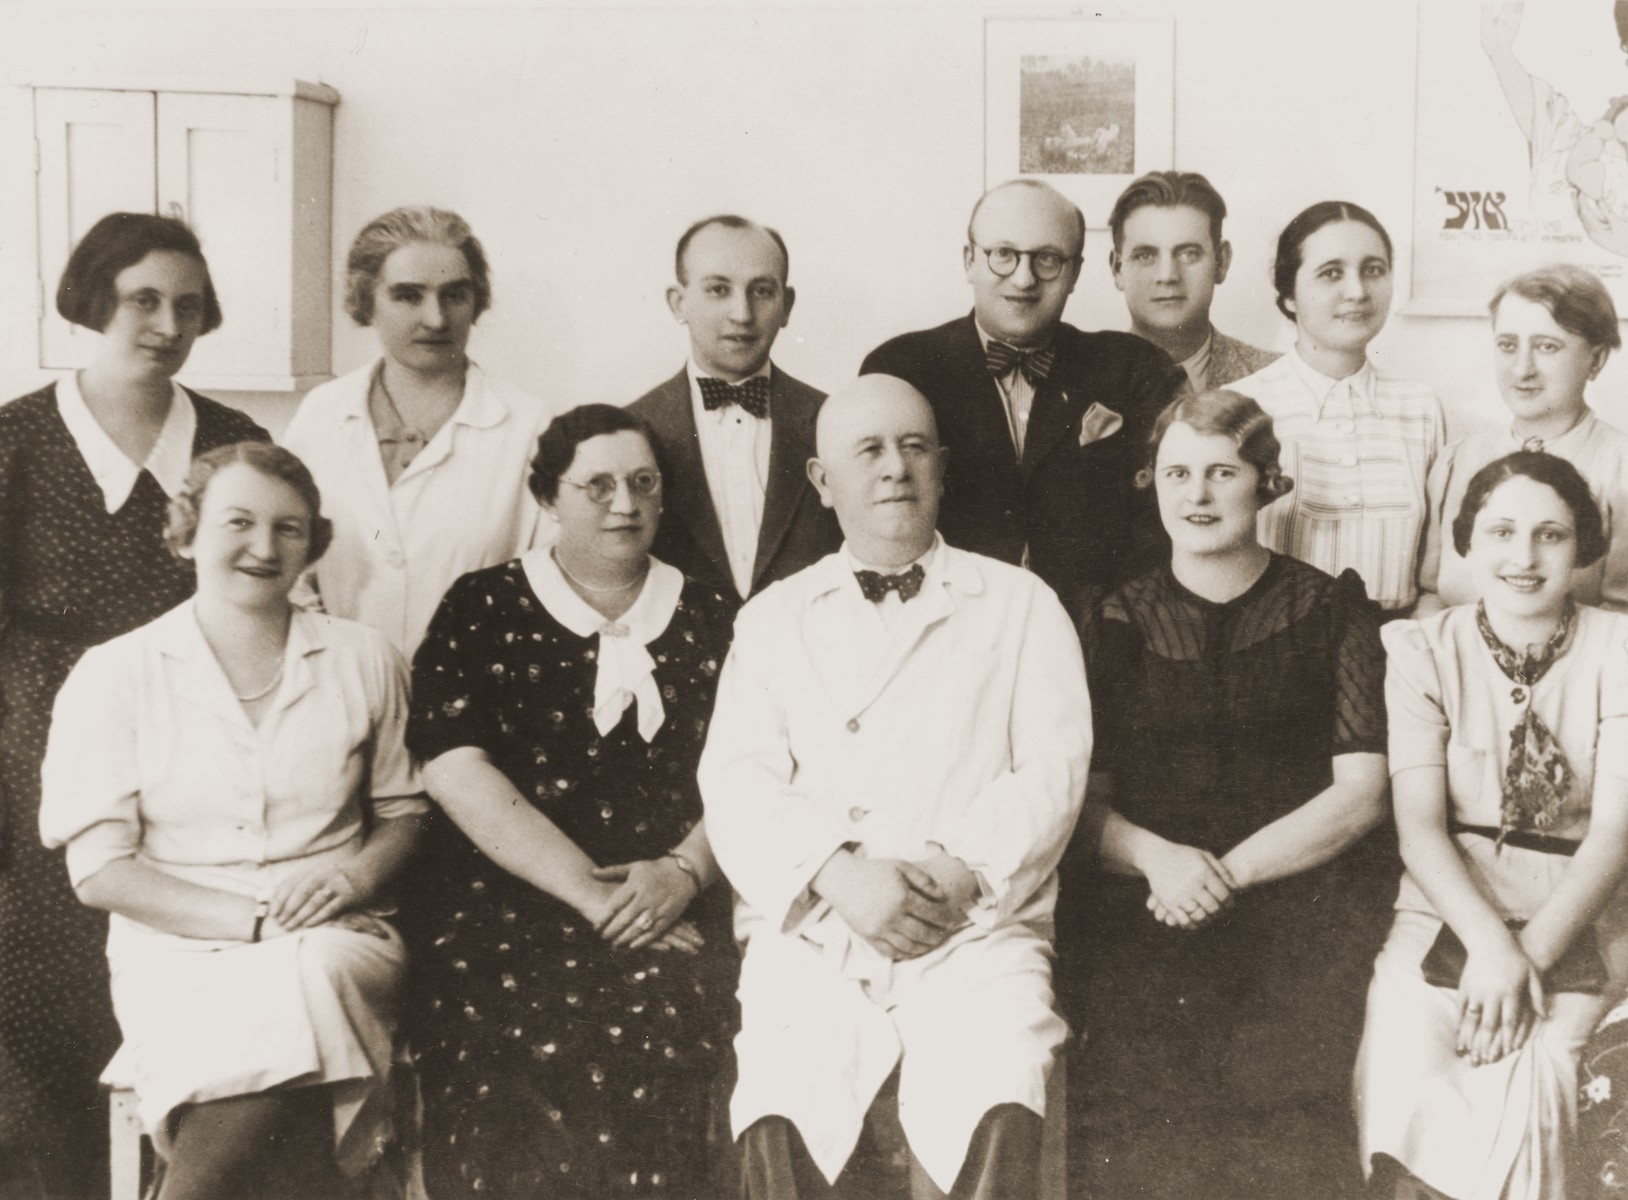 Group portrait of the staff and administrators of the OSE children's clinic in Cernauti, Romania.  

Among those pictured are Dr. Noe (front row center); Anny (Hubner) Andermann (front row, second from the right); Dr. Mendel Wiesenthal (standing in the back row, fourth from the right); and Dr. Salter (back row, far right).